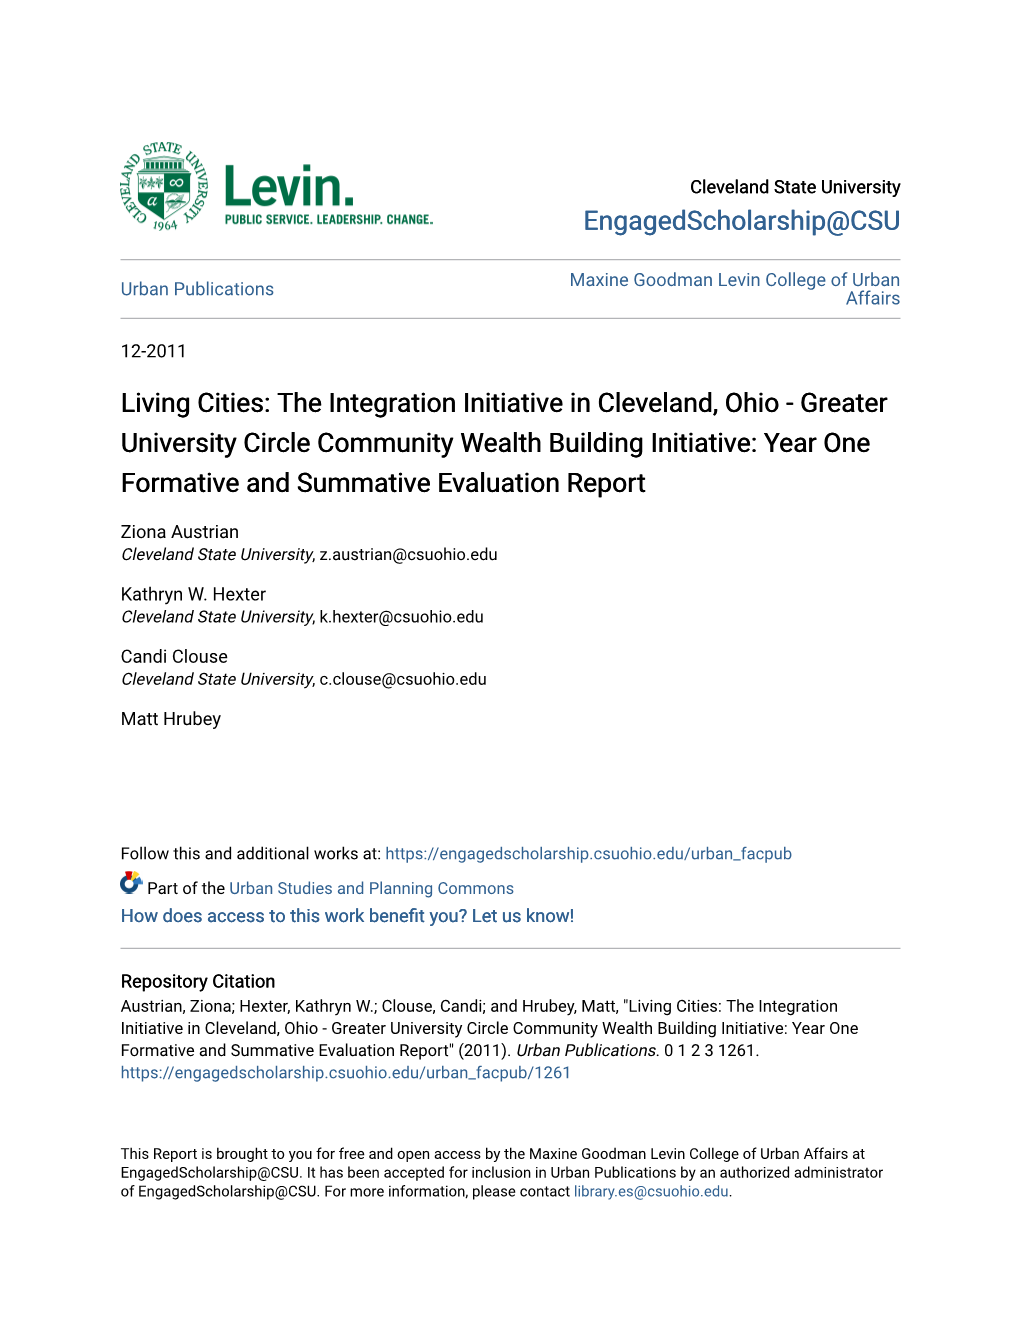 Living Cities: the Integration Initiative in Cleveland, Ohio